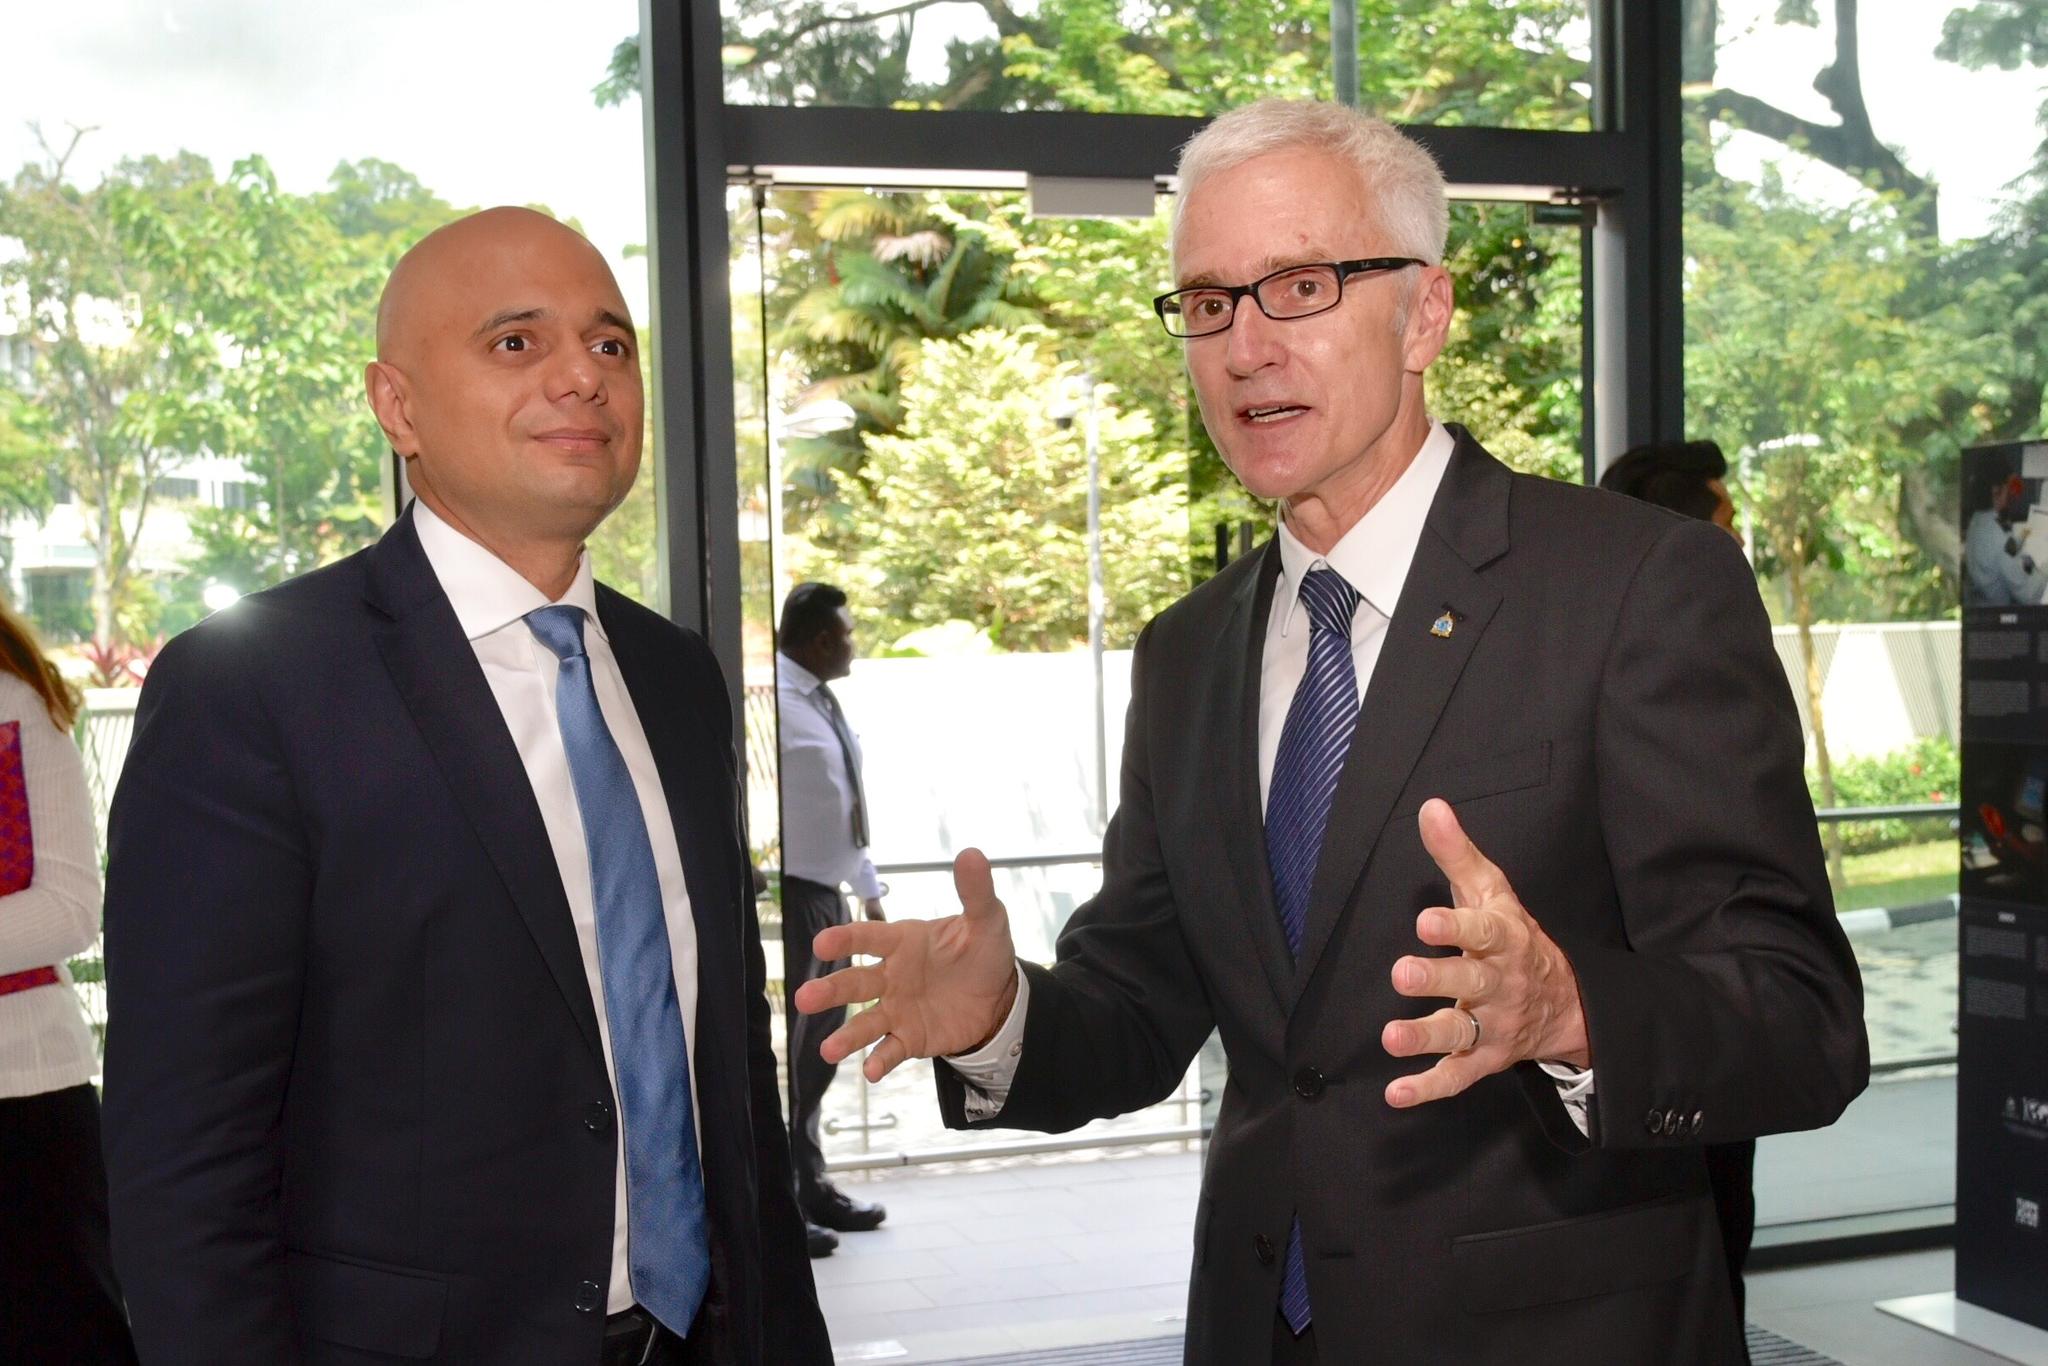 Meeting with INTERPOL Secretary General Jürgen Stock, Home Secretary Javid was briefed on a range of security issues.